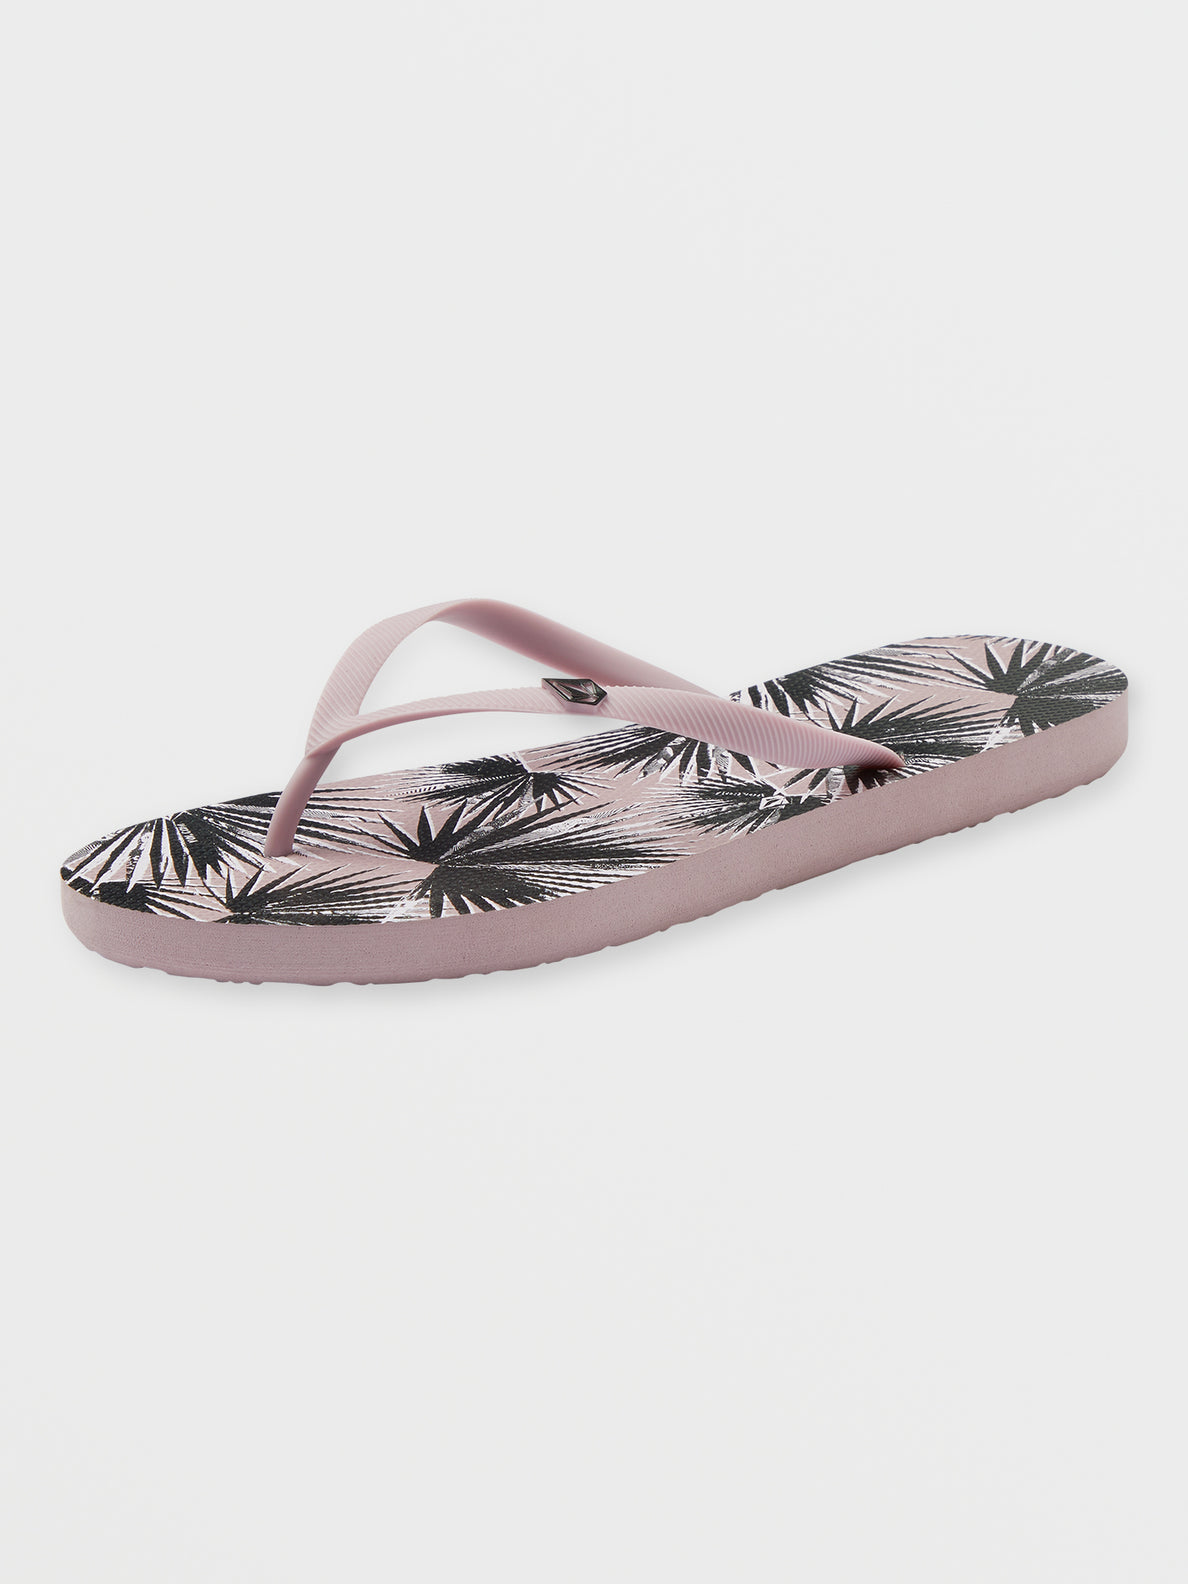 Rocking Solid Sandals - Faded Mauve